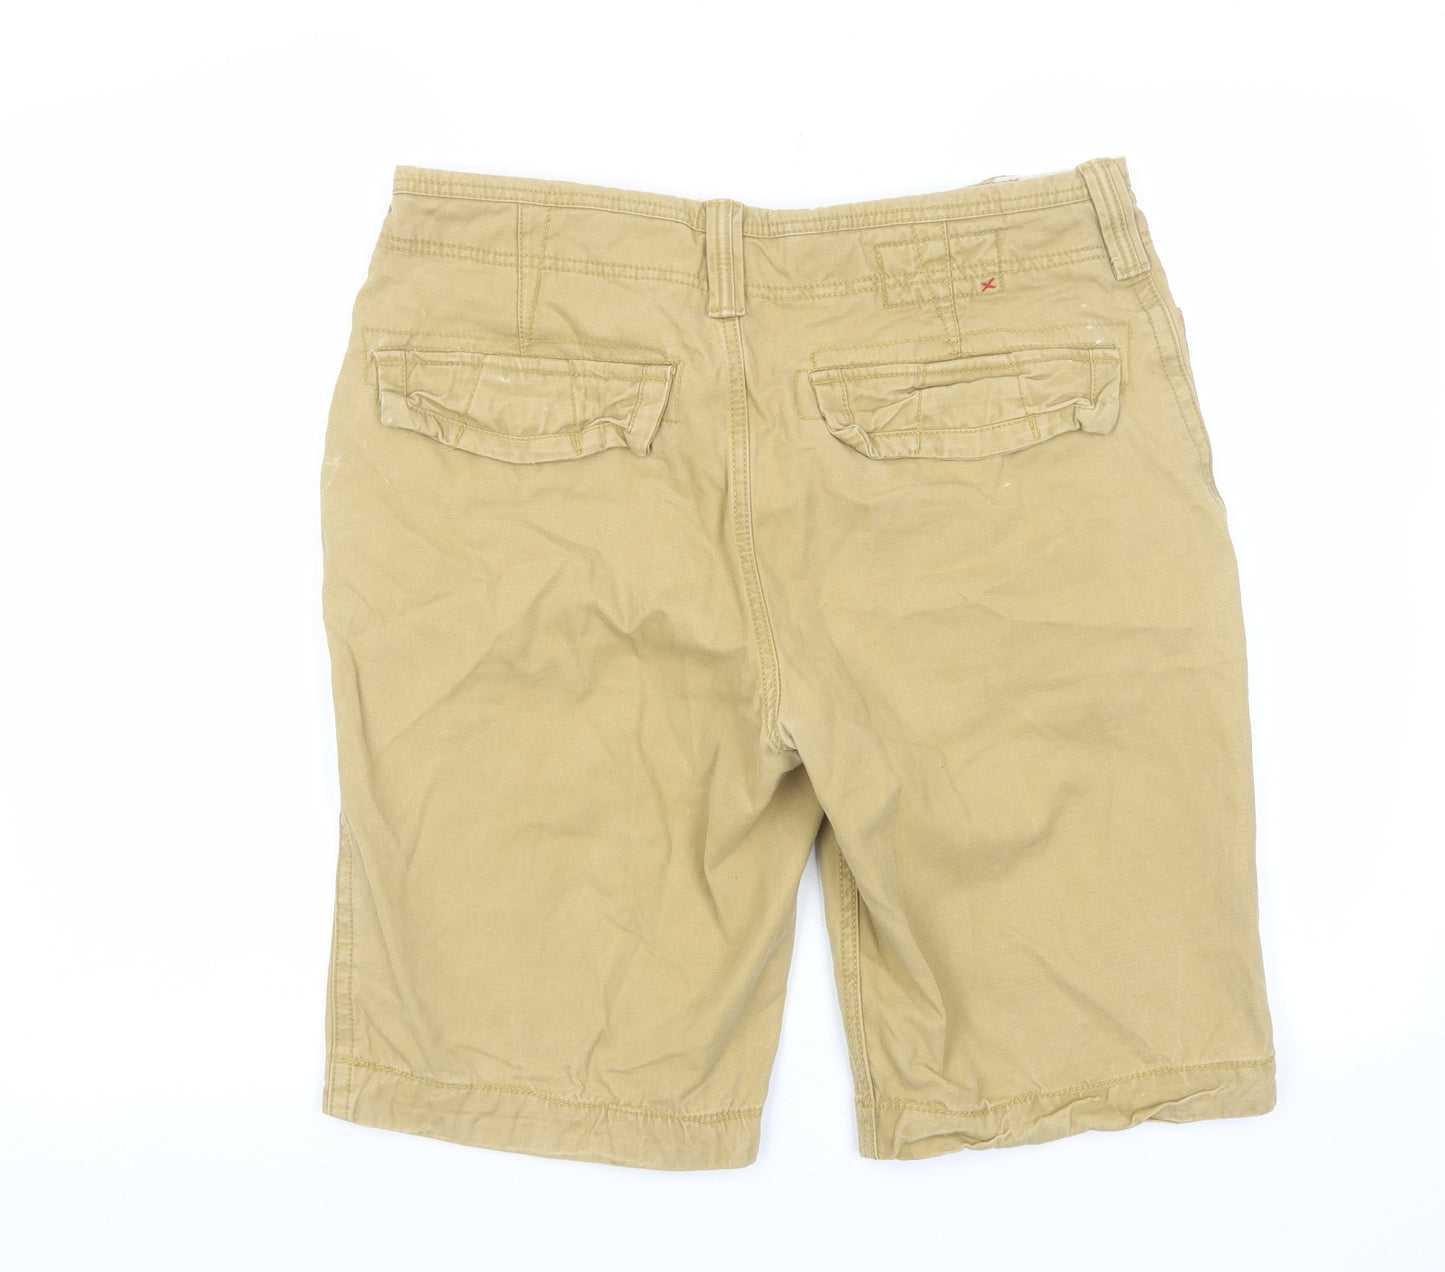 Fat Face Mens Beige Cotton Chino Shorts Size 32 in L10 in Regular Buckle